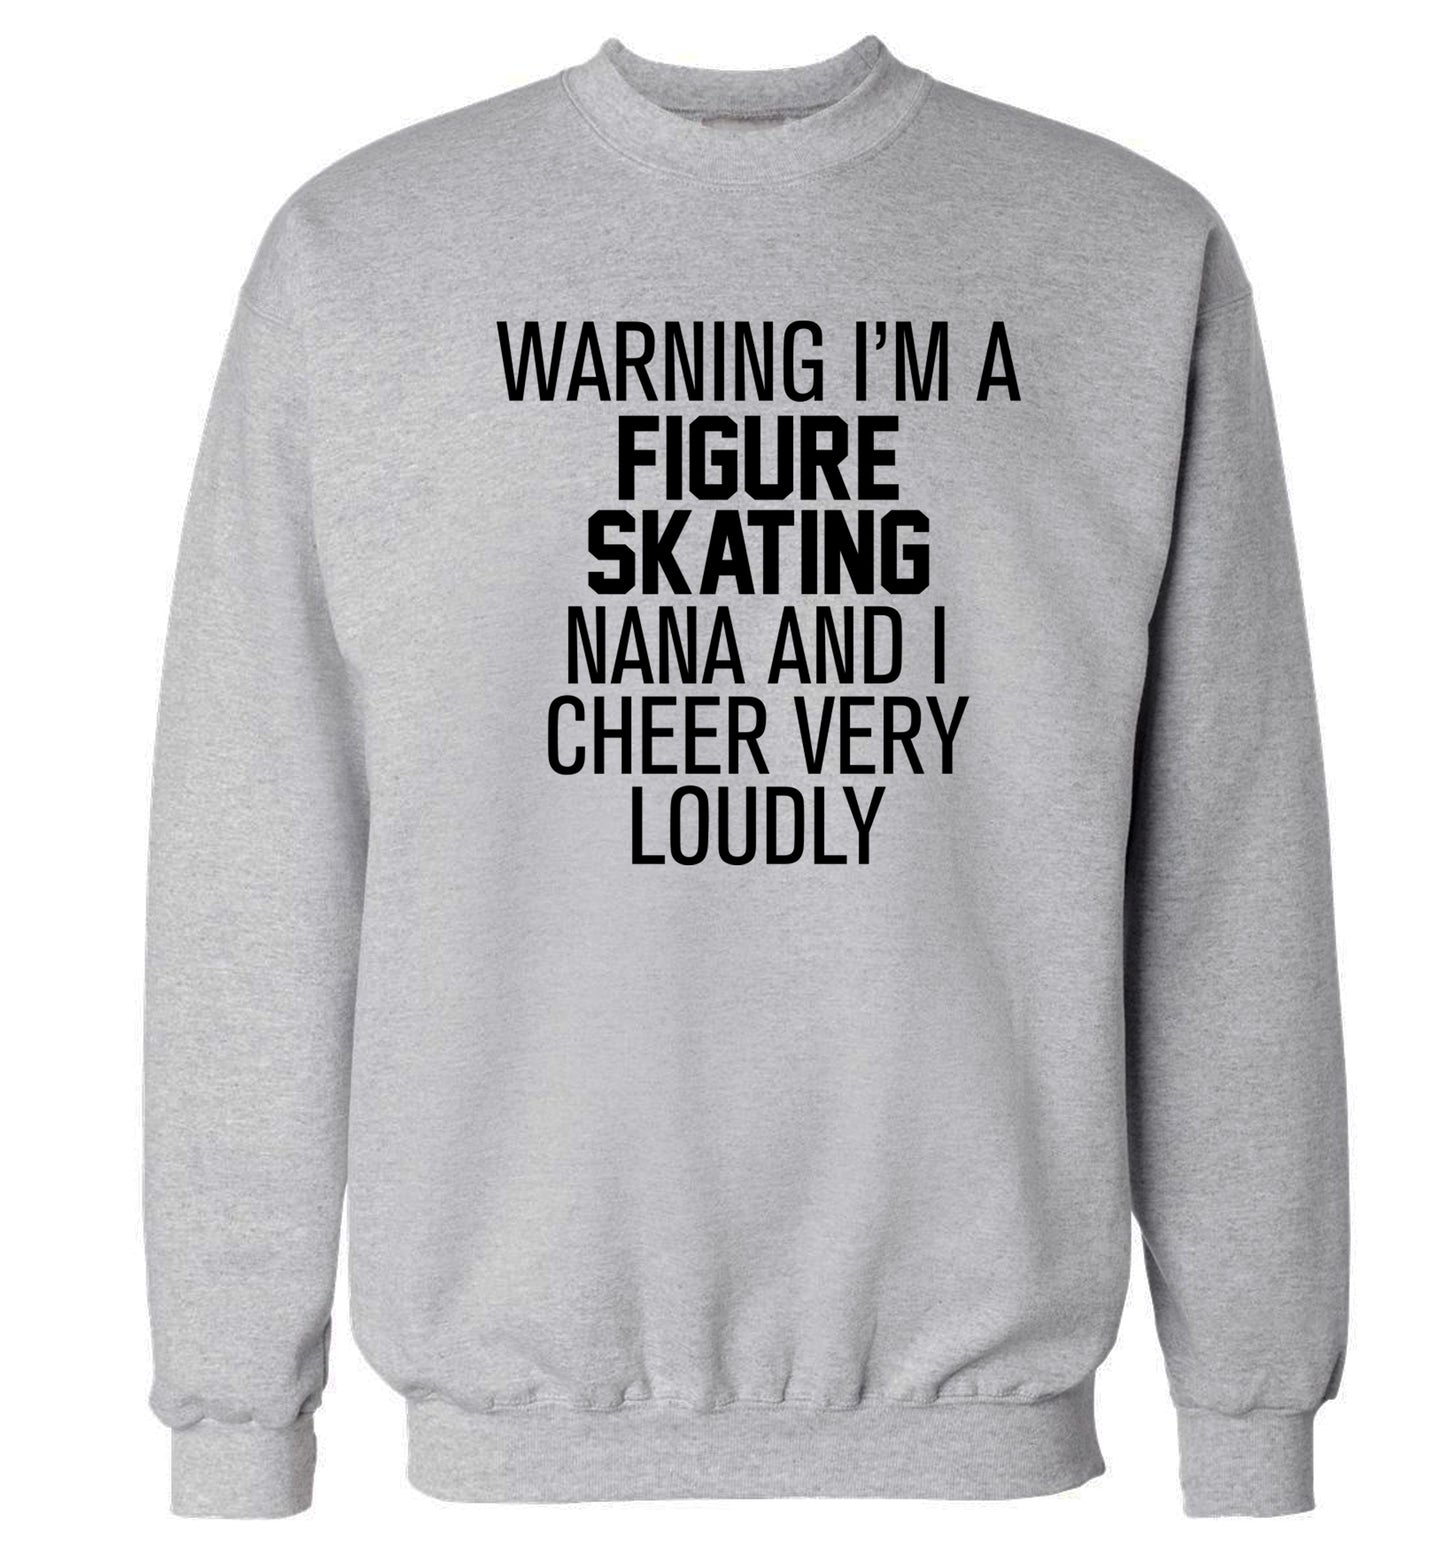 Warning I'm a figure skating nana and I cheer very loudly Adult's unisexgrey Sweater 2XL